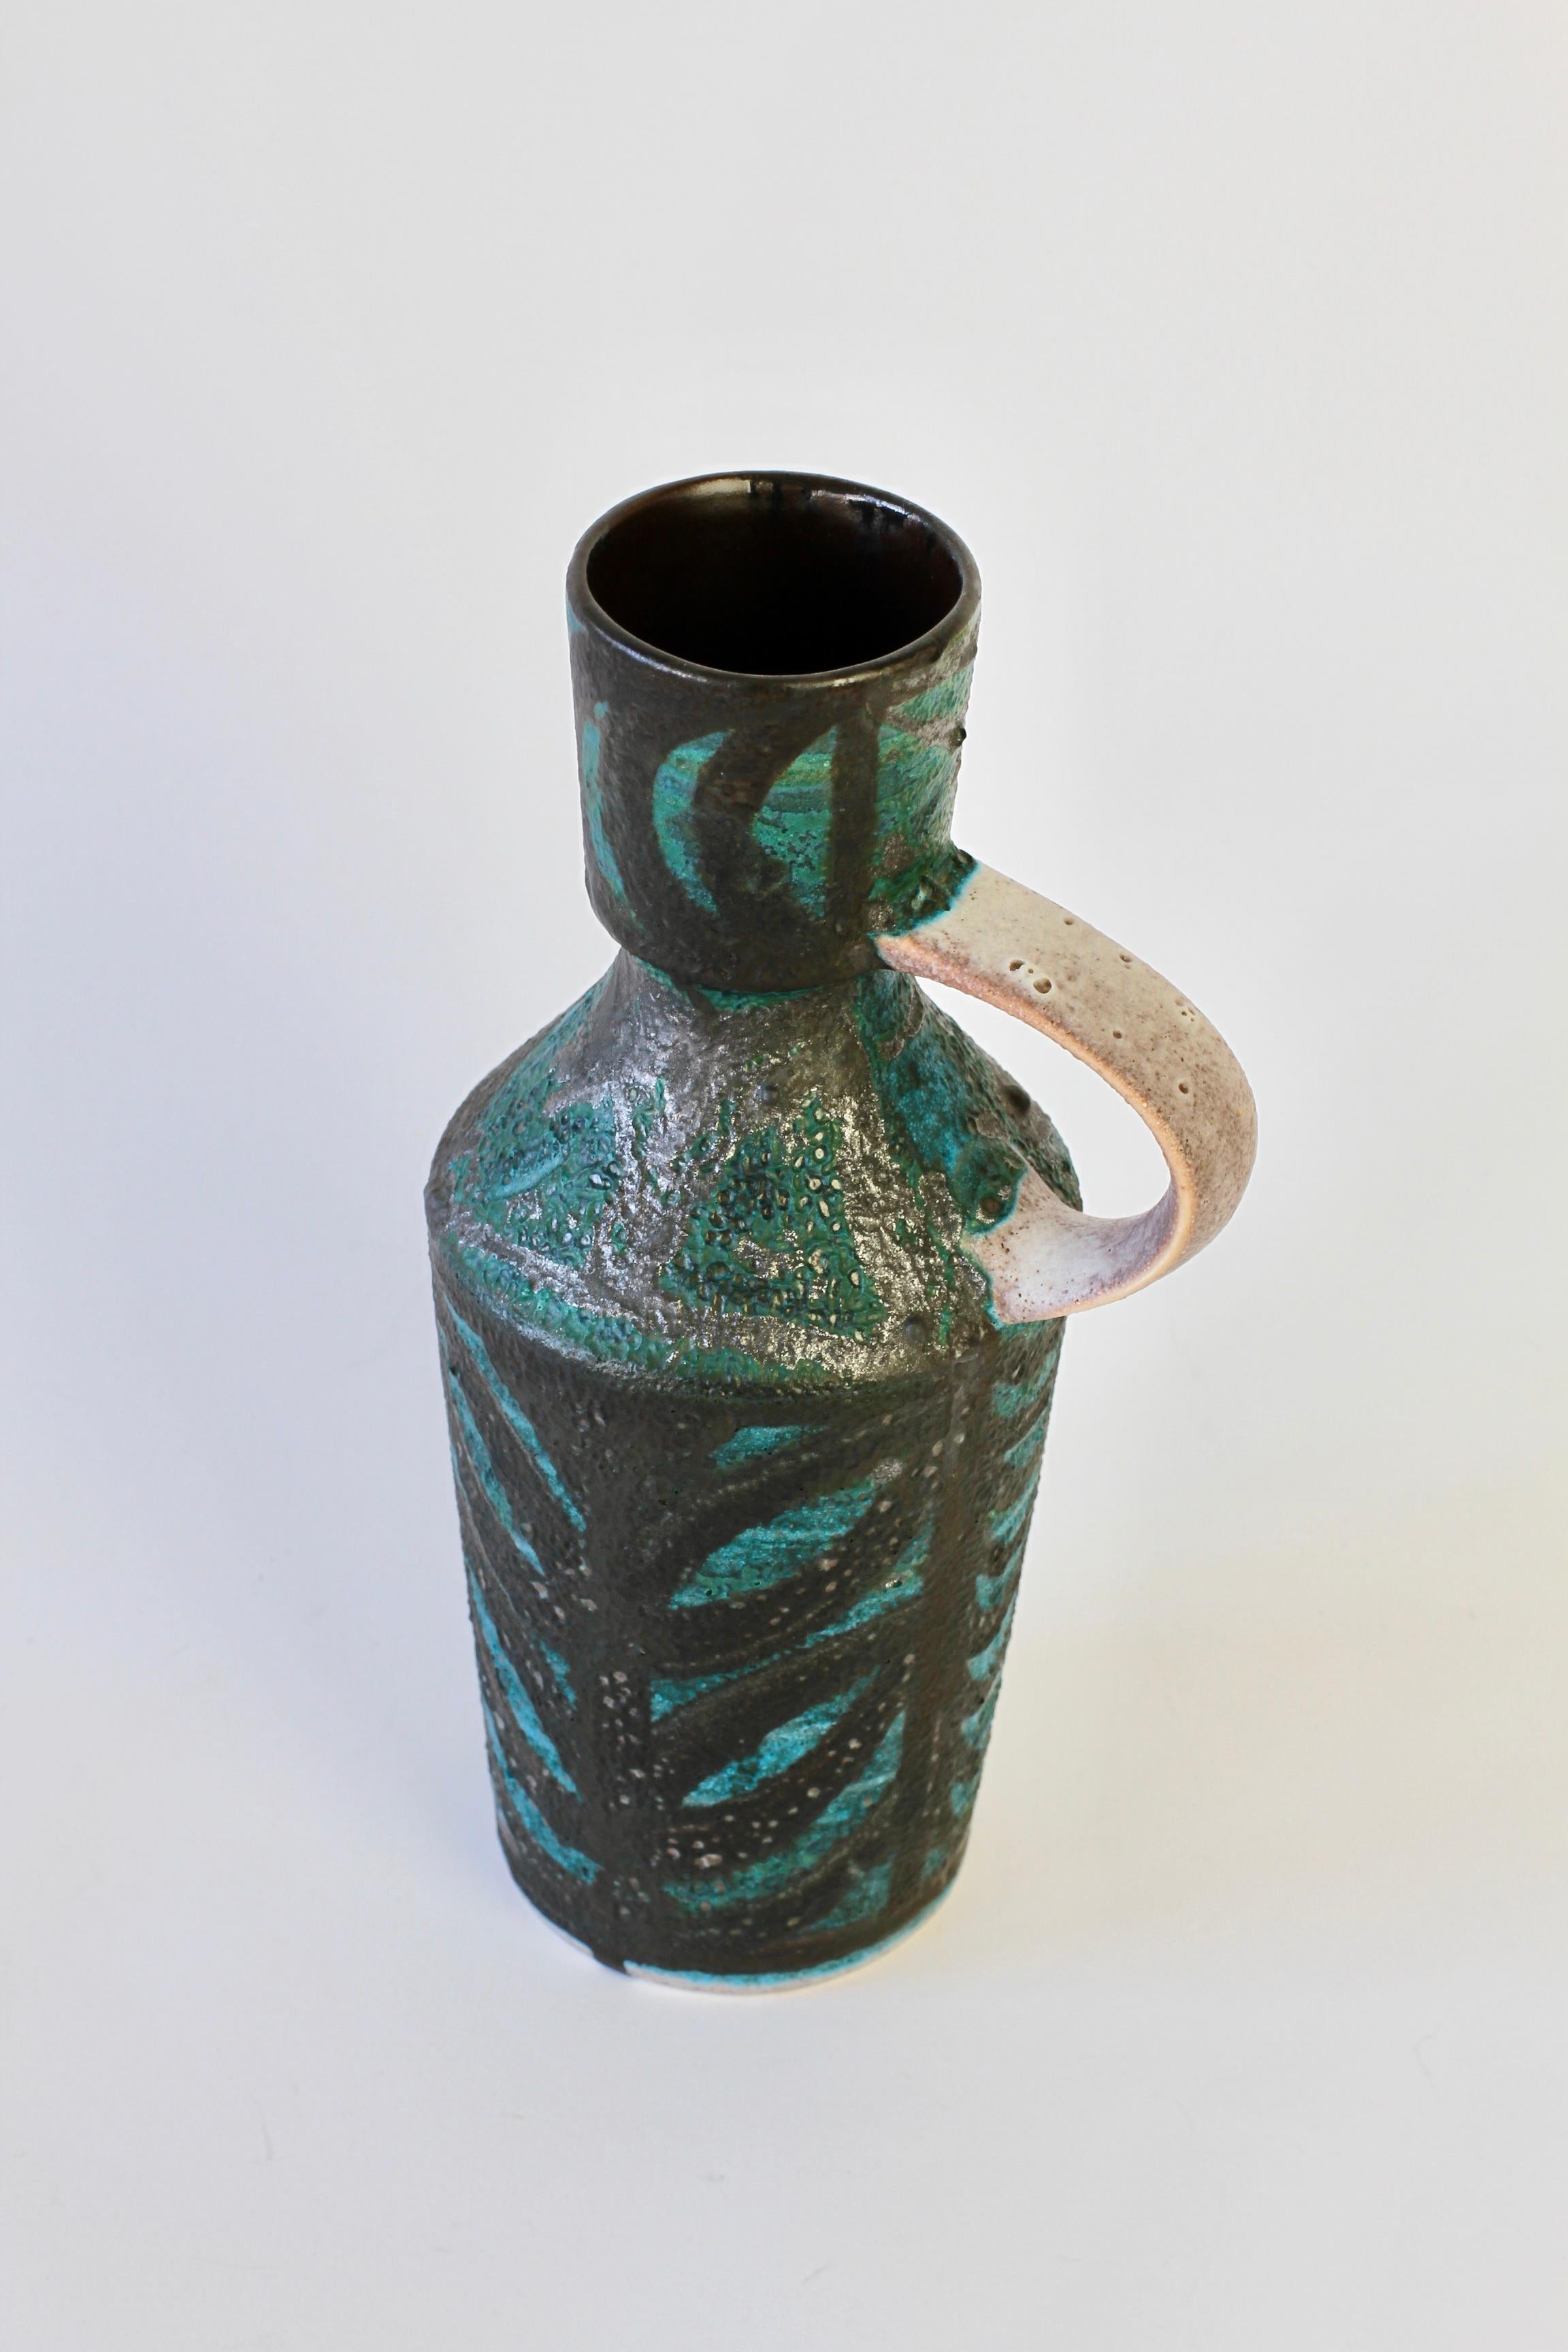 Clay Vintage Midcentury Vase with Green and Black Lava Glaze Accents For Sale